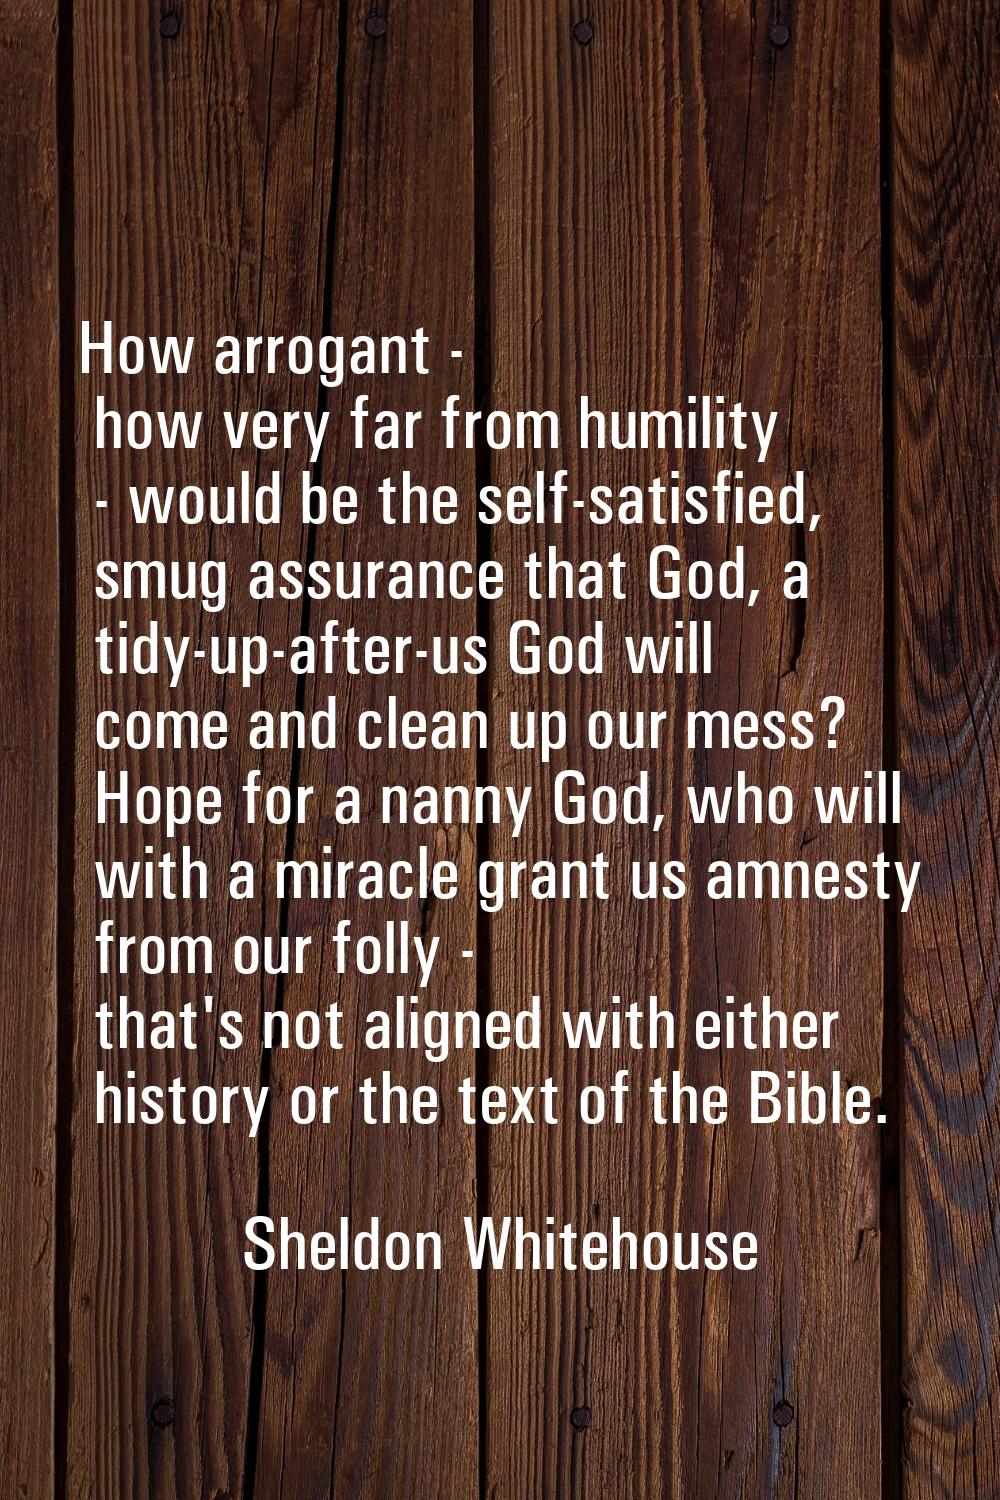 How arrogant - how very far from humility - would be the self-satisfied, smug assurance that God, a